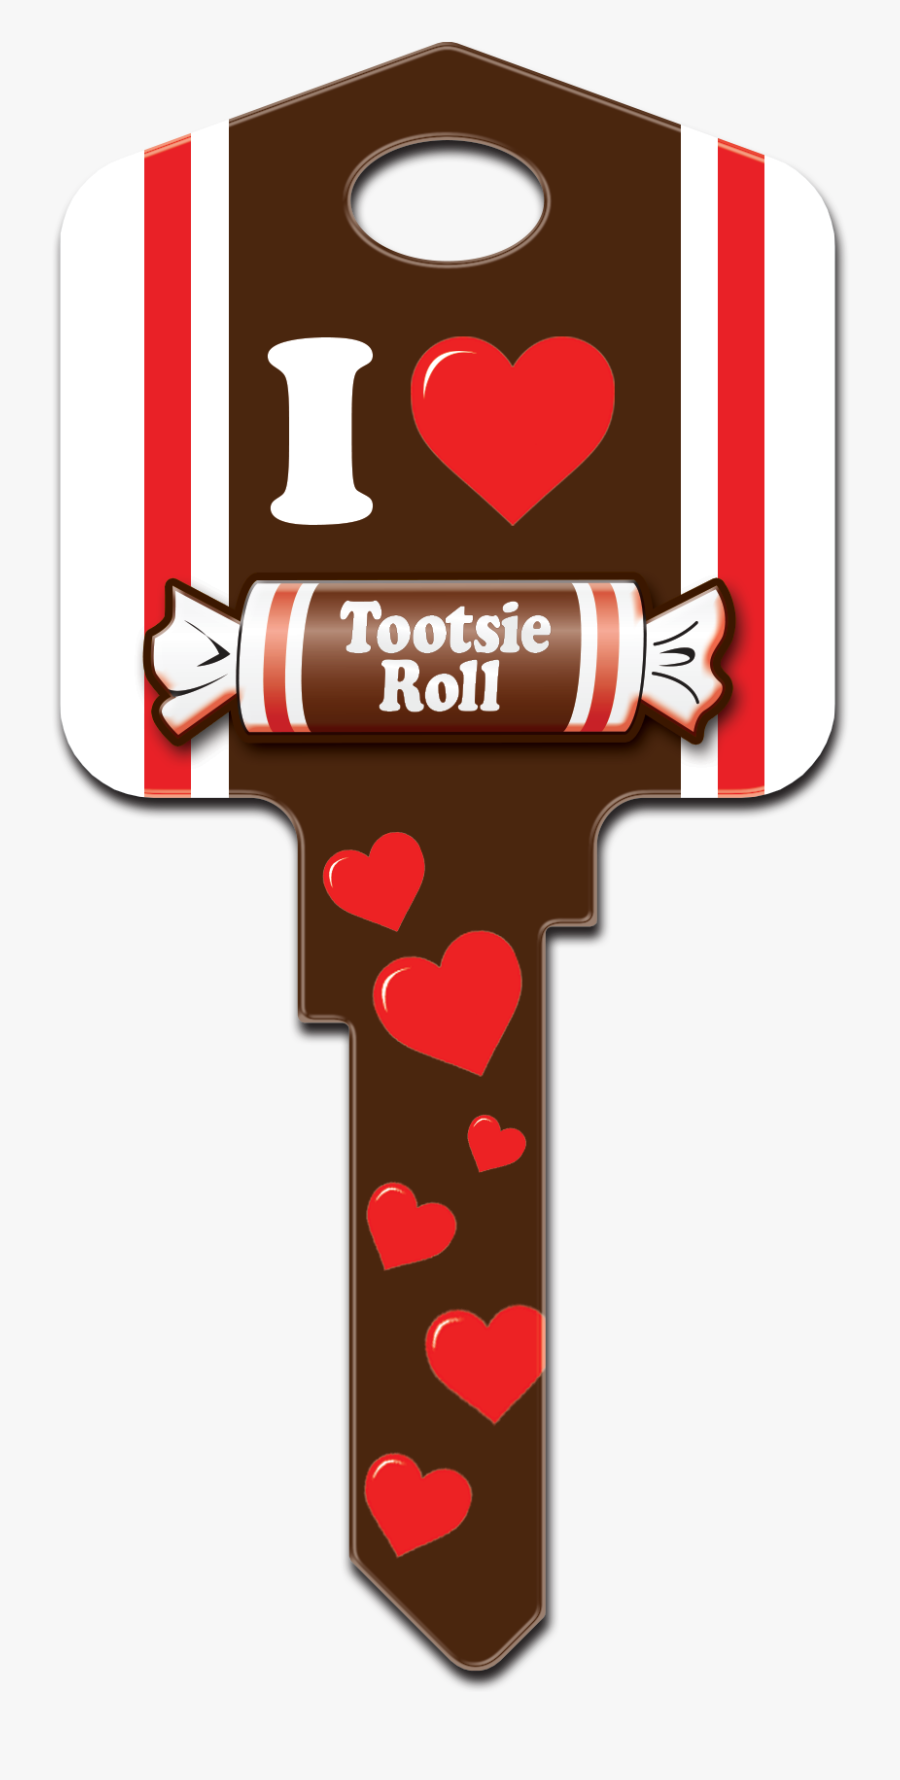 Tootsie Roll Png - Tootsie Roll Costume, free clipart download, png, clipar...